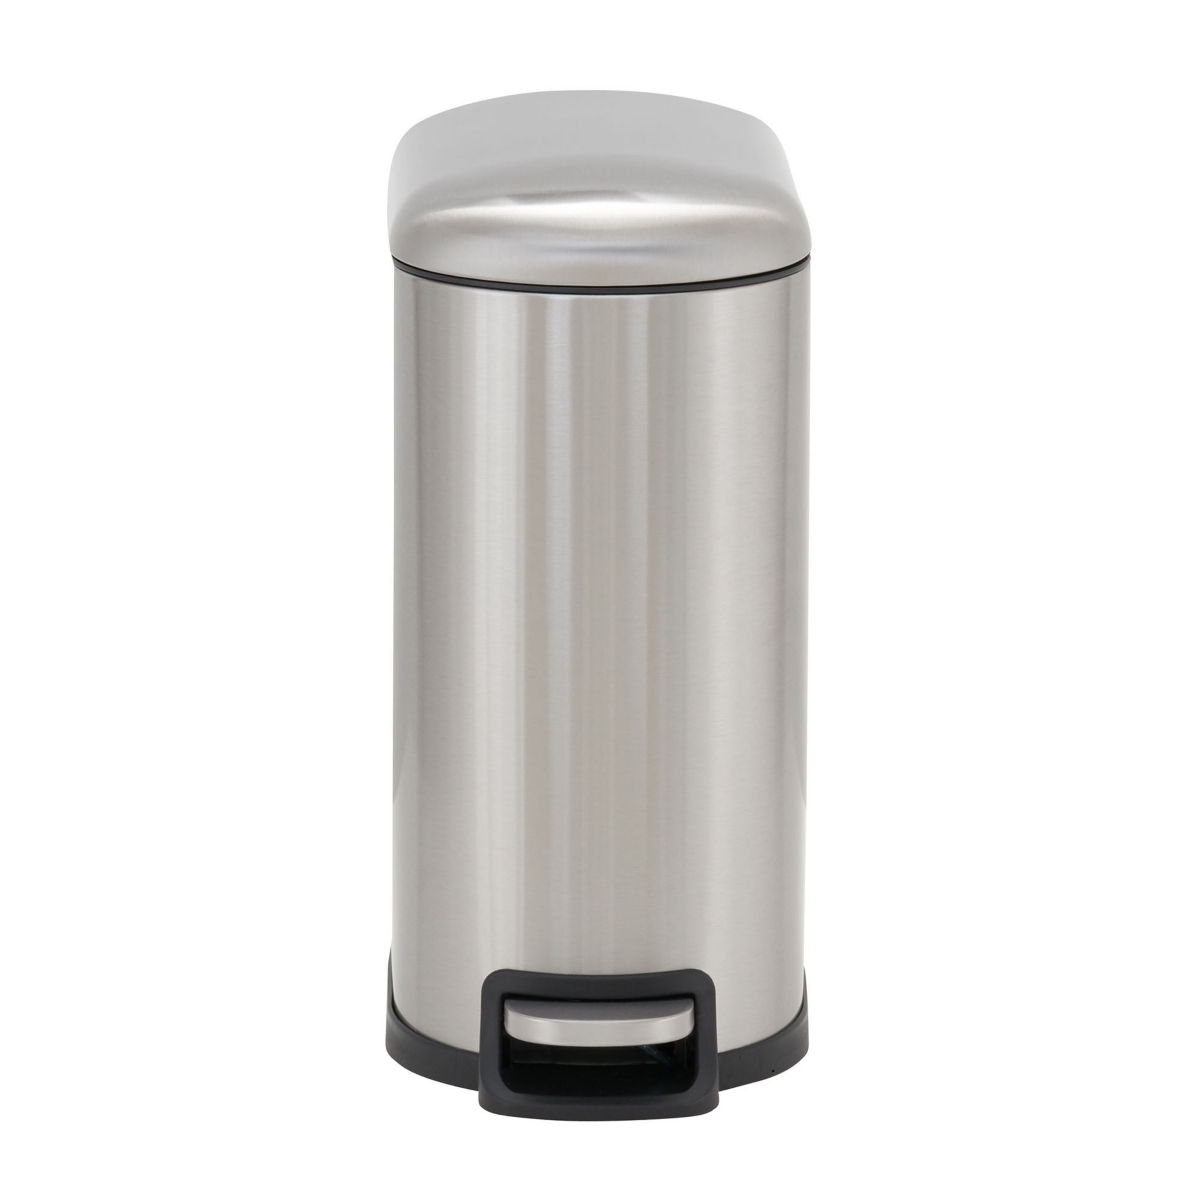 Stainless Steel 10L Tuscany Narrow Trash Bin - Stainless Steel